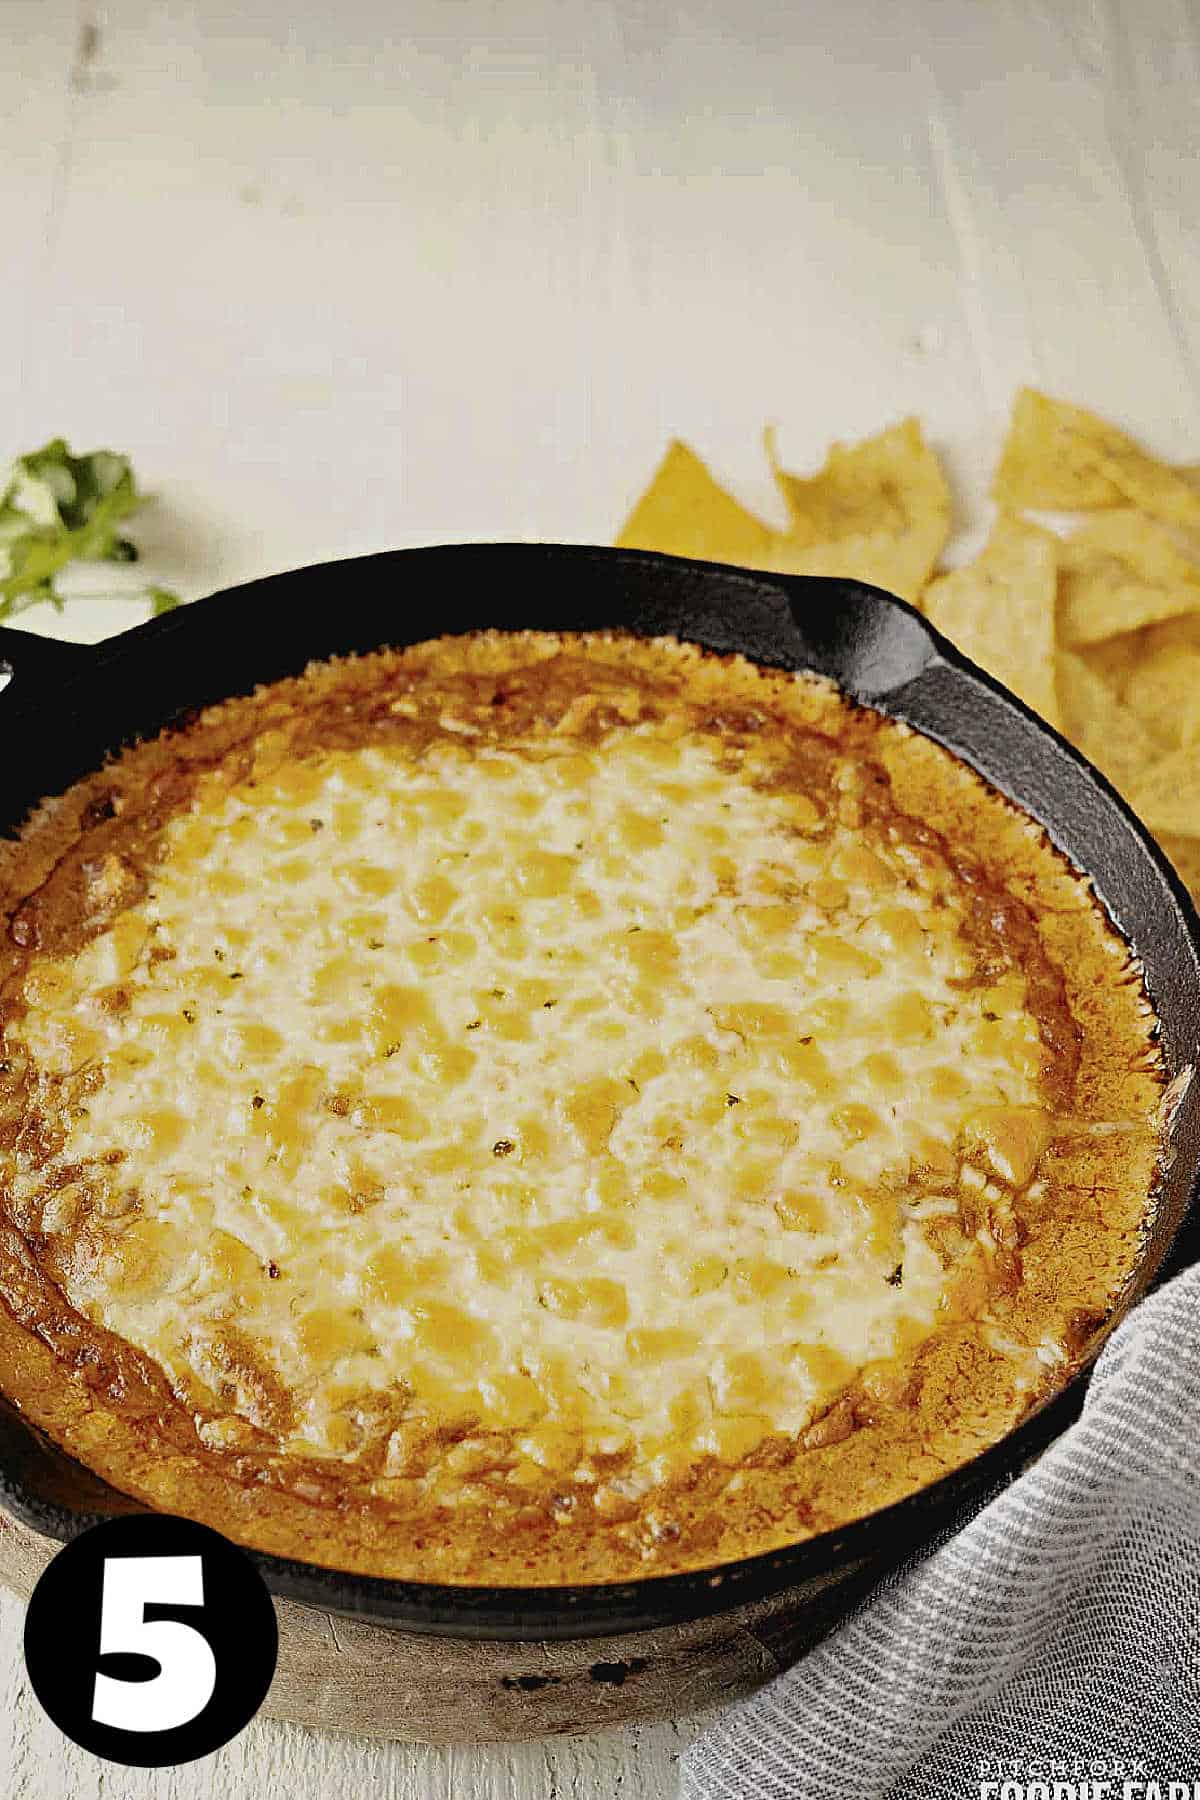 Cheesy chili dip with melted cheese in a skillet.